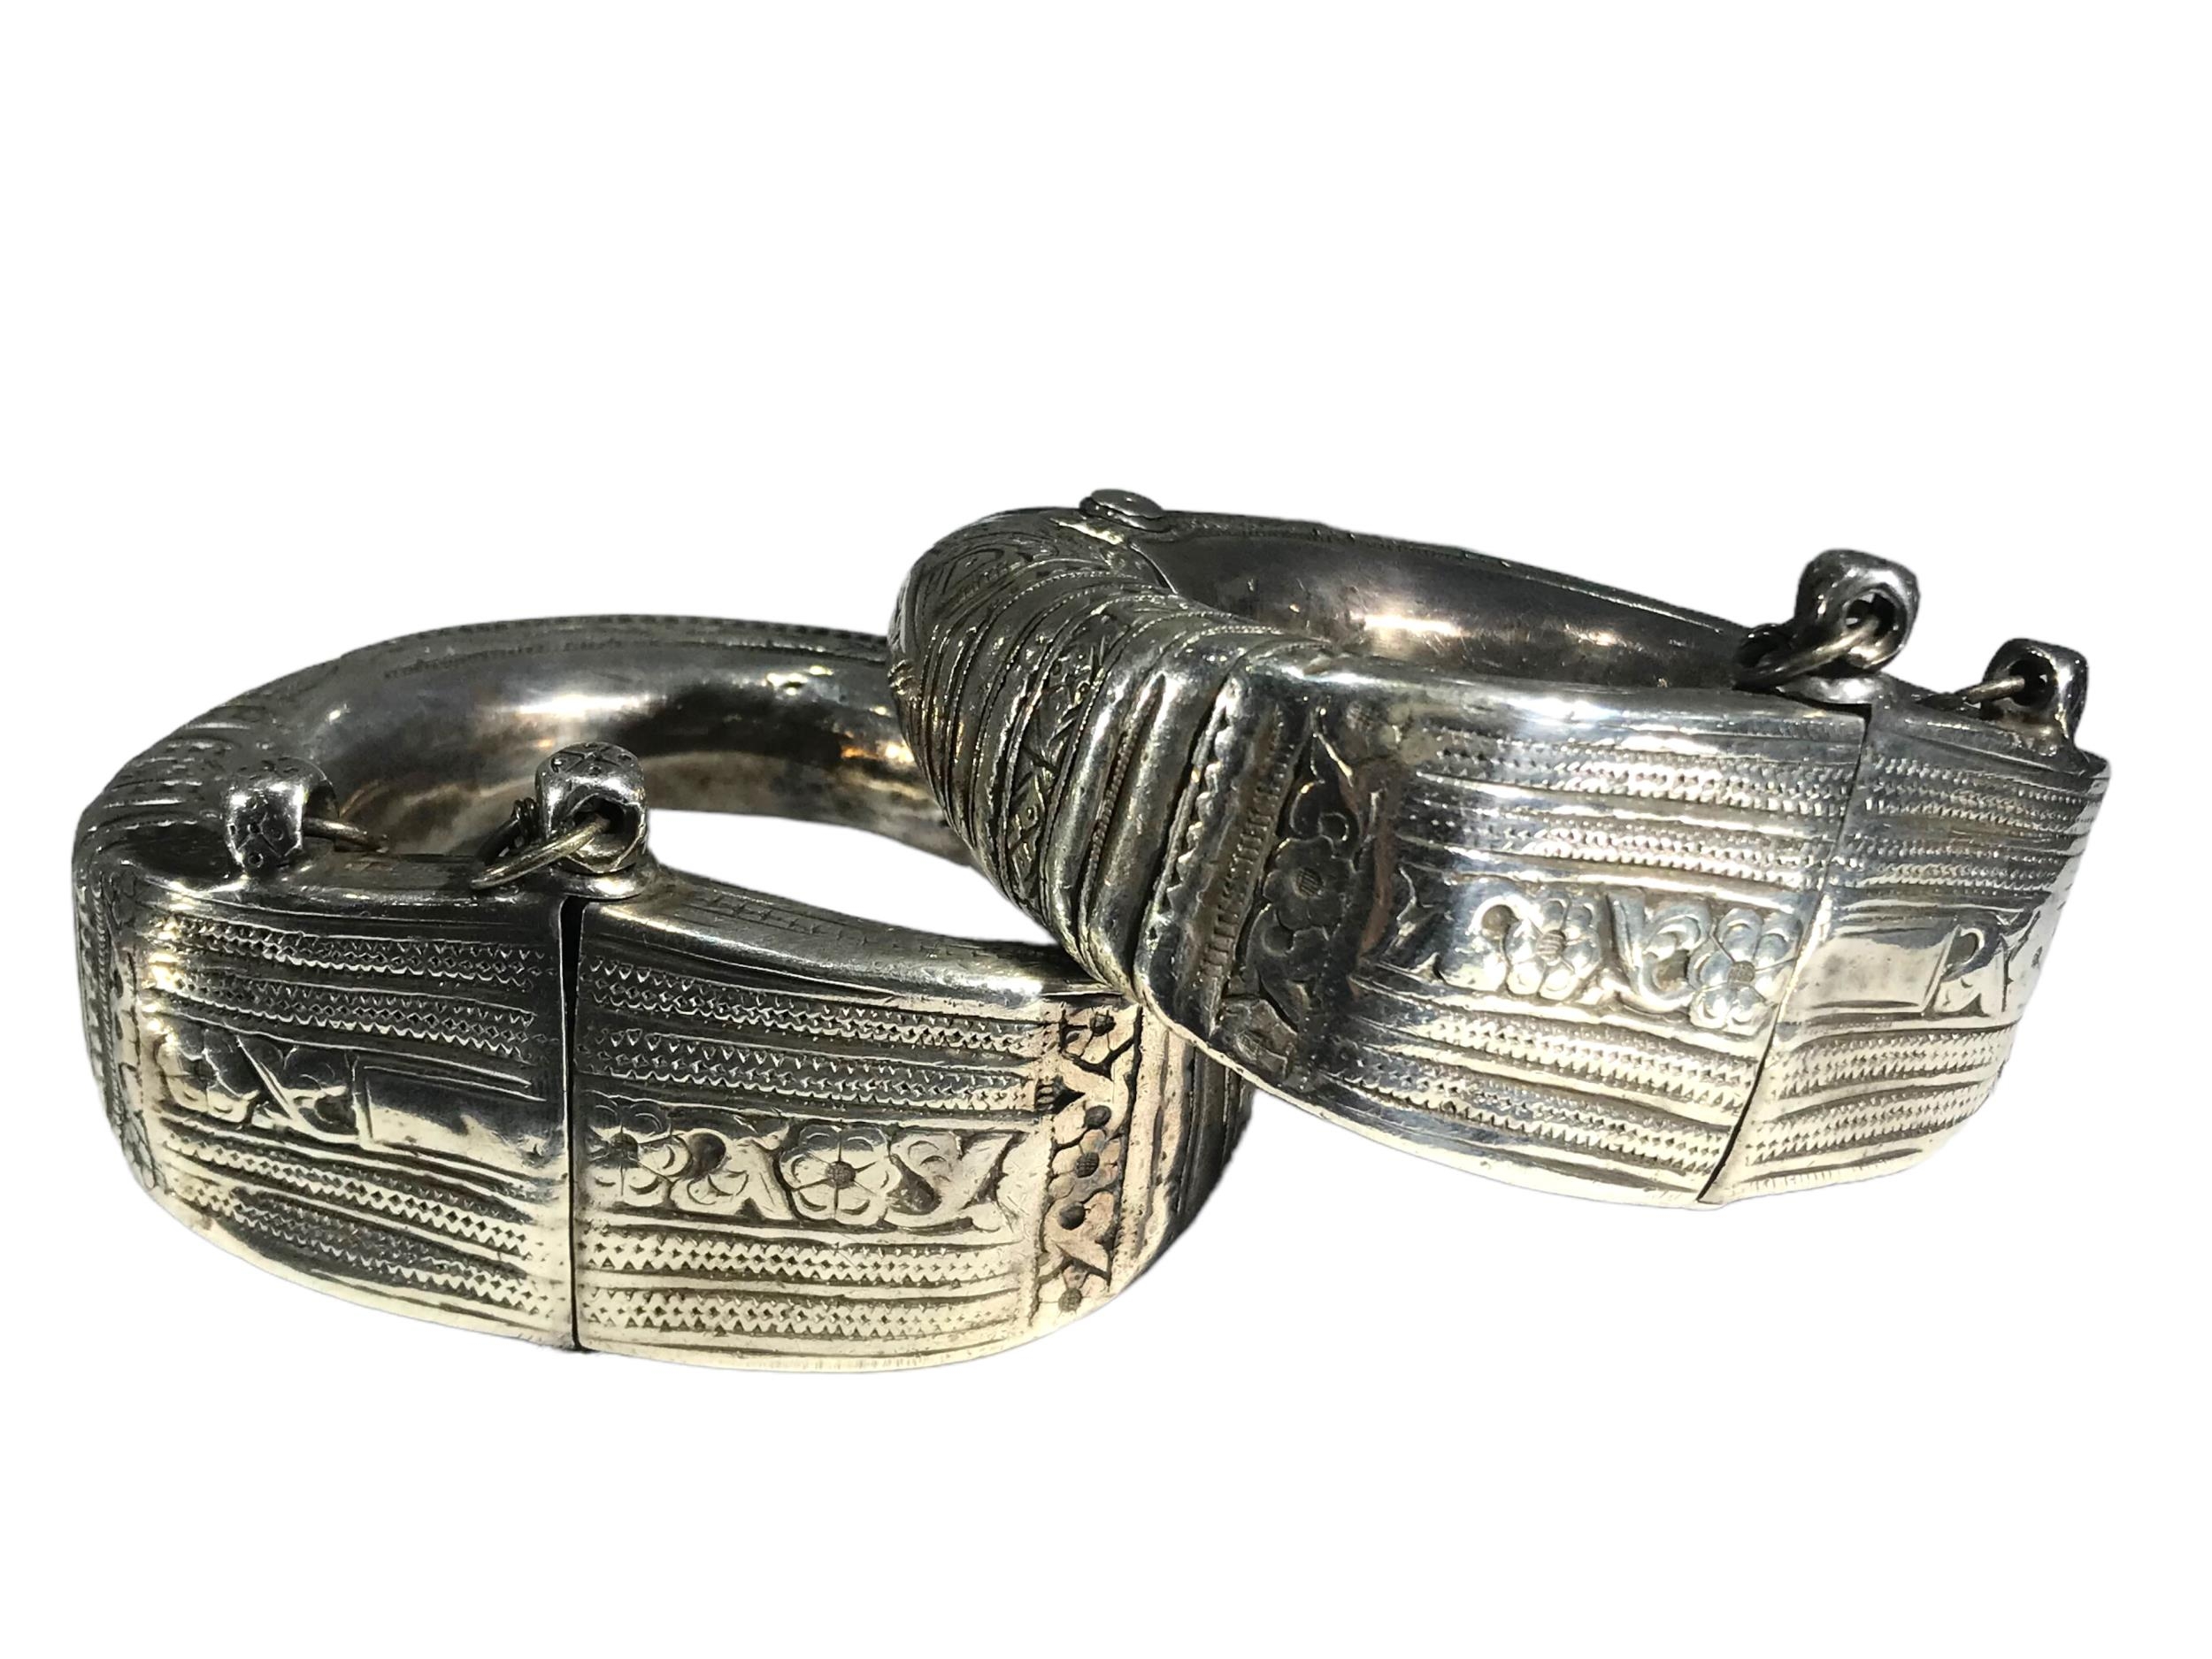 A PAIR OF LATE 19TH/EARLY 20TH CENTURY OMANI SILVER ANKLETS (PROBABLY FROM SUR, OMAN) Decorated with